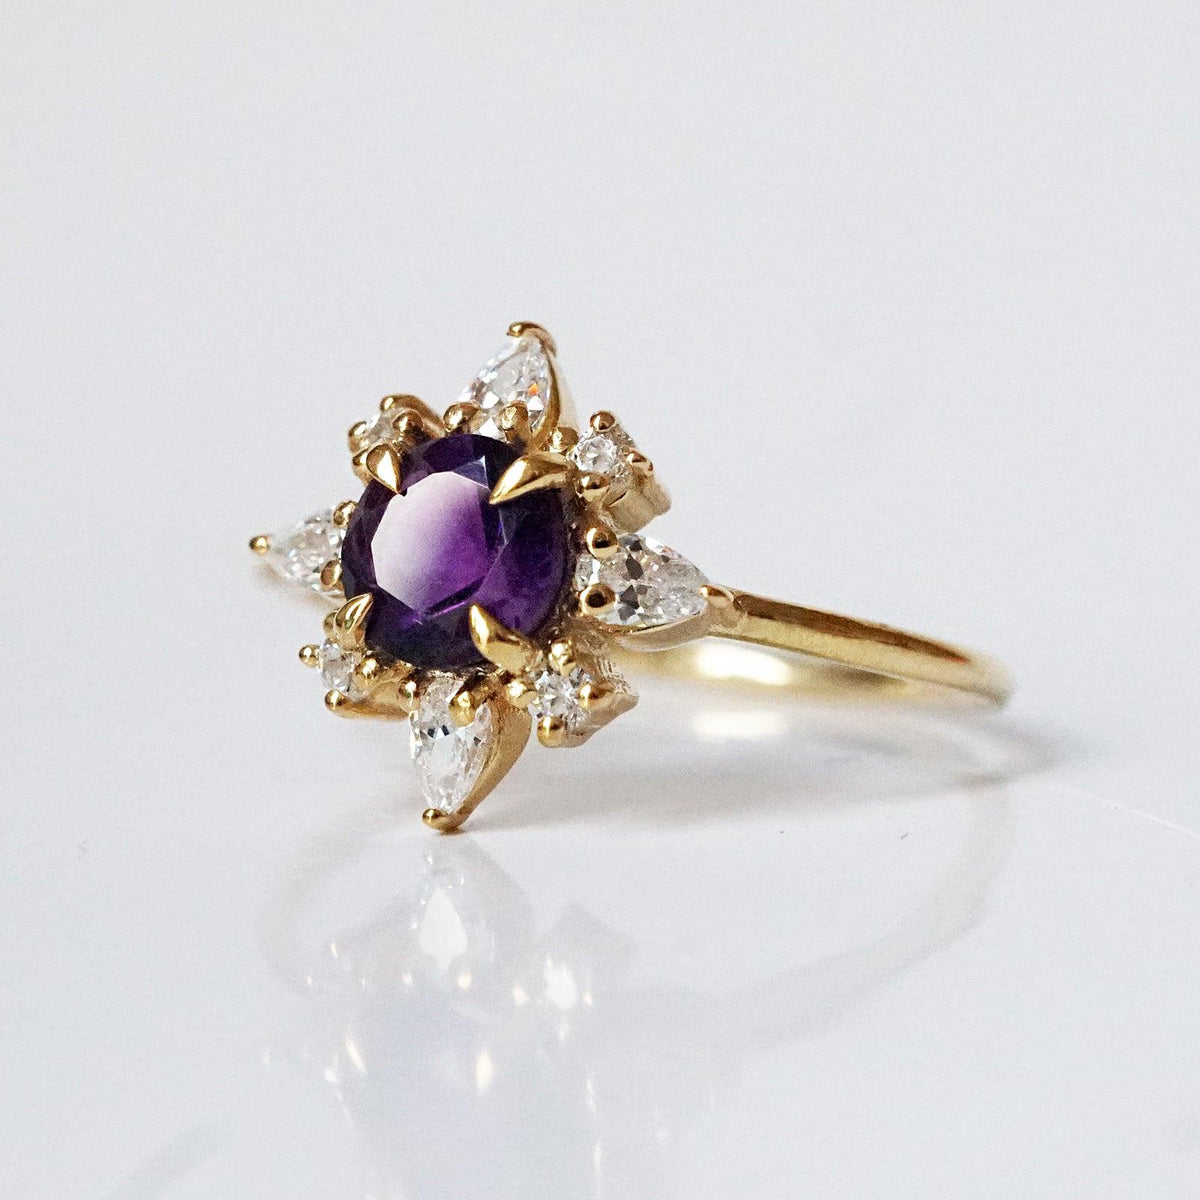 Amethyst Passion Flower Ring